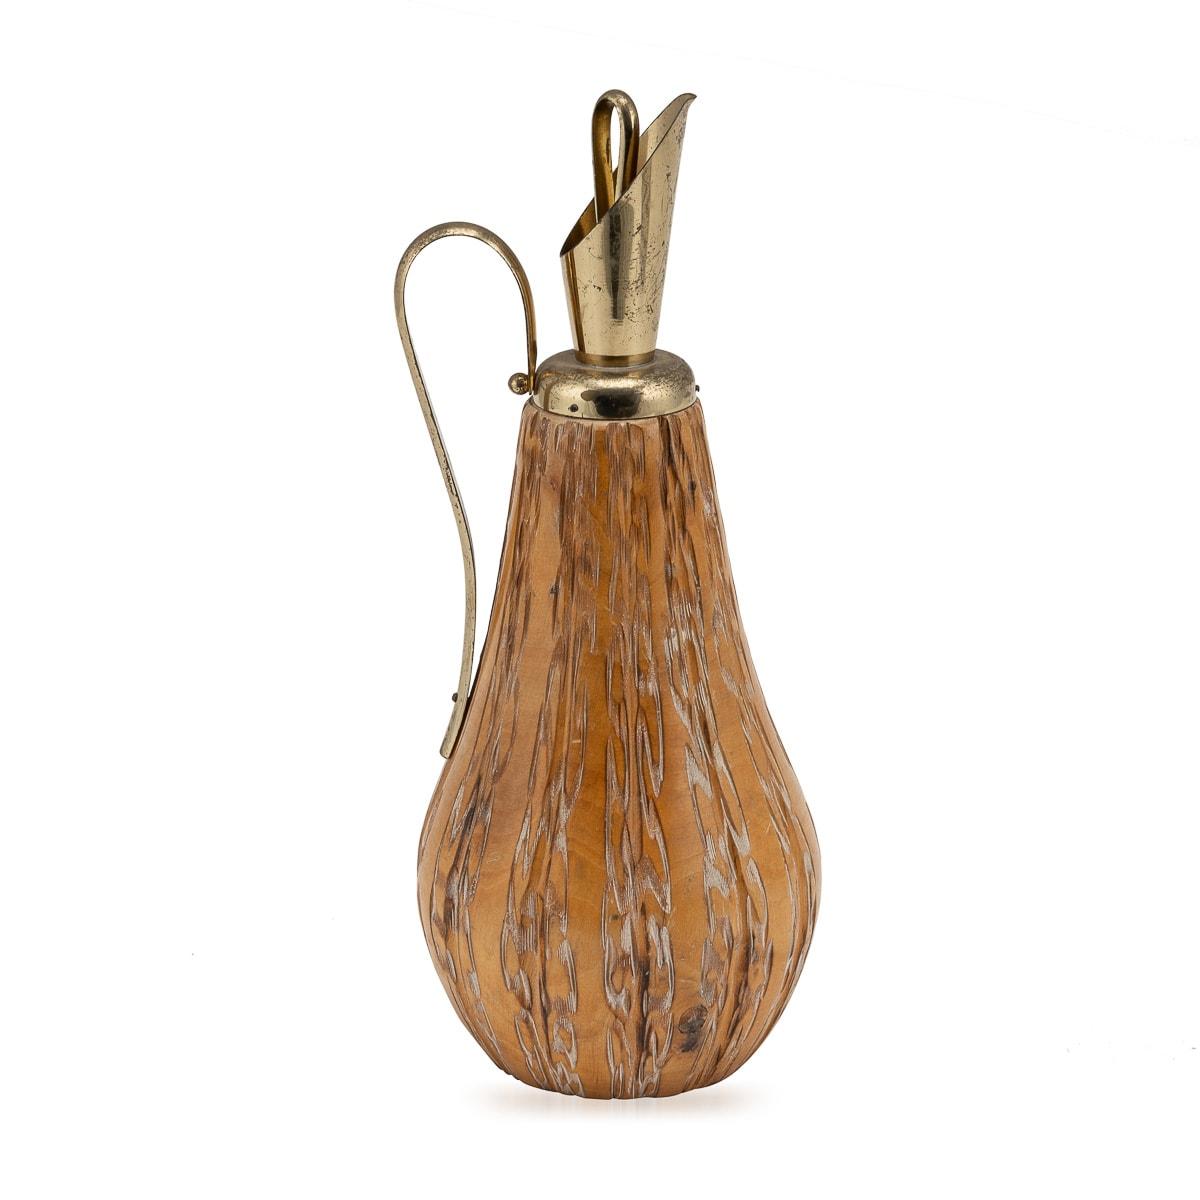 Mid-Century Modern 20th Century Italian Carved Wood Flask By Aldo Tura For Macabo c.1960 For Sale